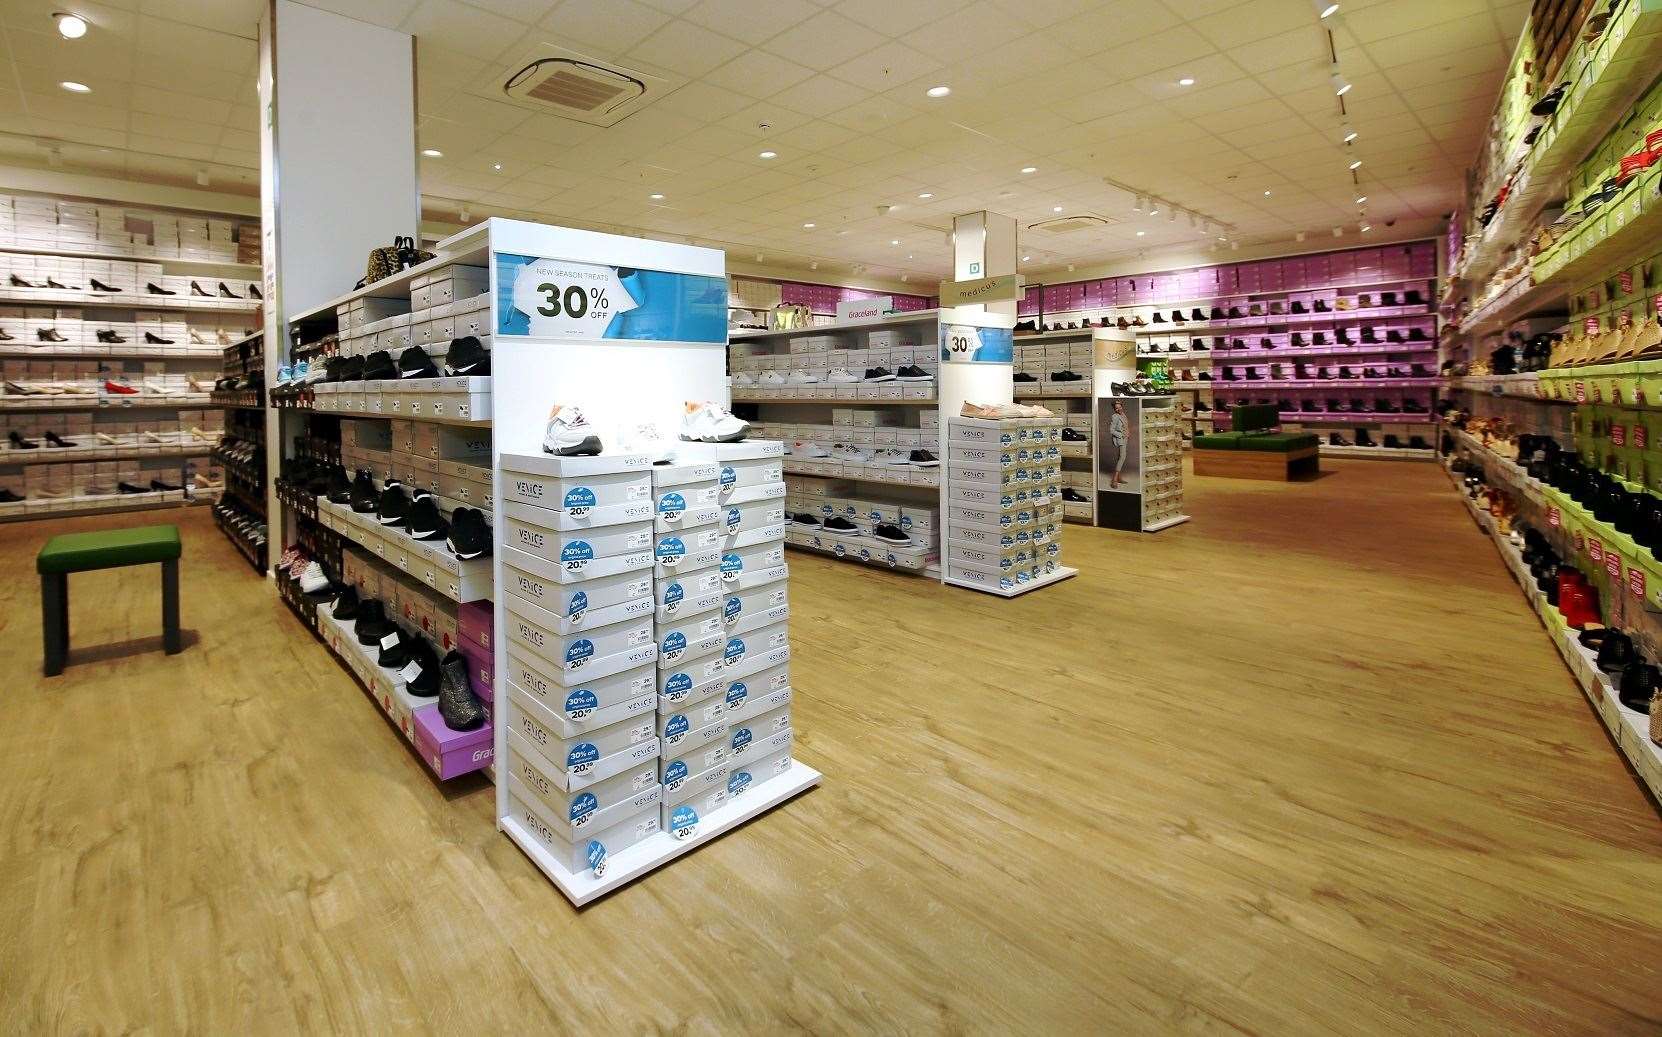 The newly-converted first floor of Deichmann (9019715)